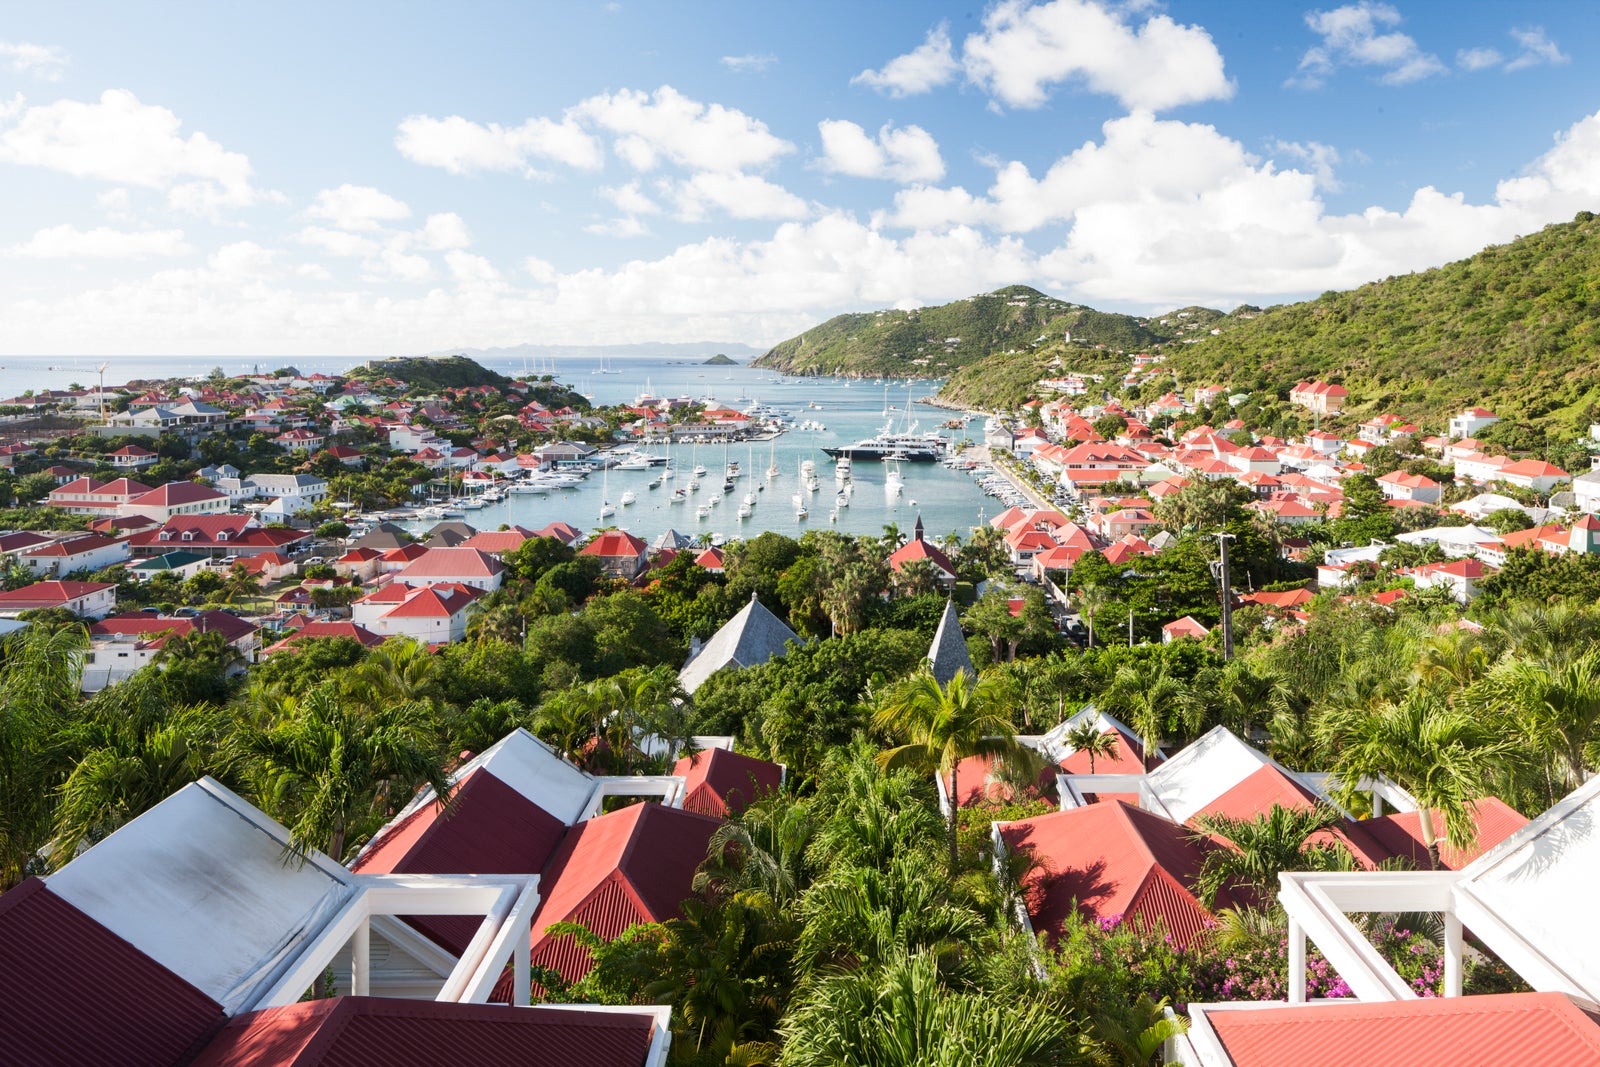 5 Reasons Why St. Barts is the Ultimate Jetset Destination